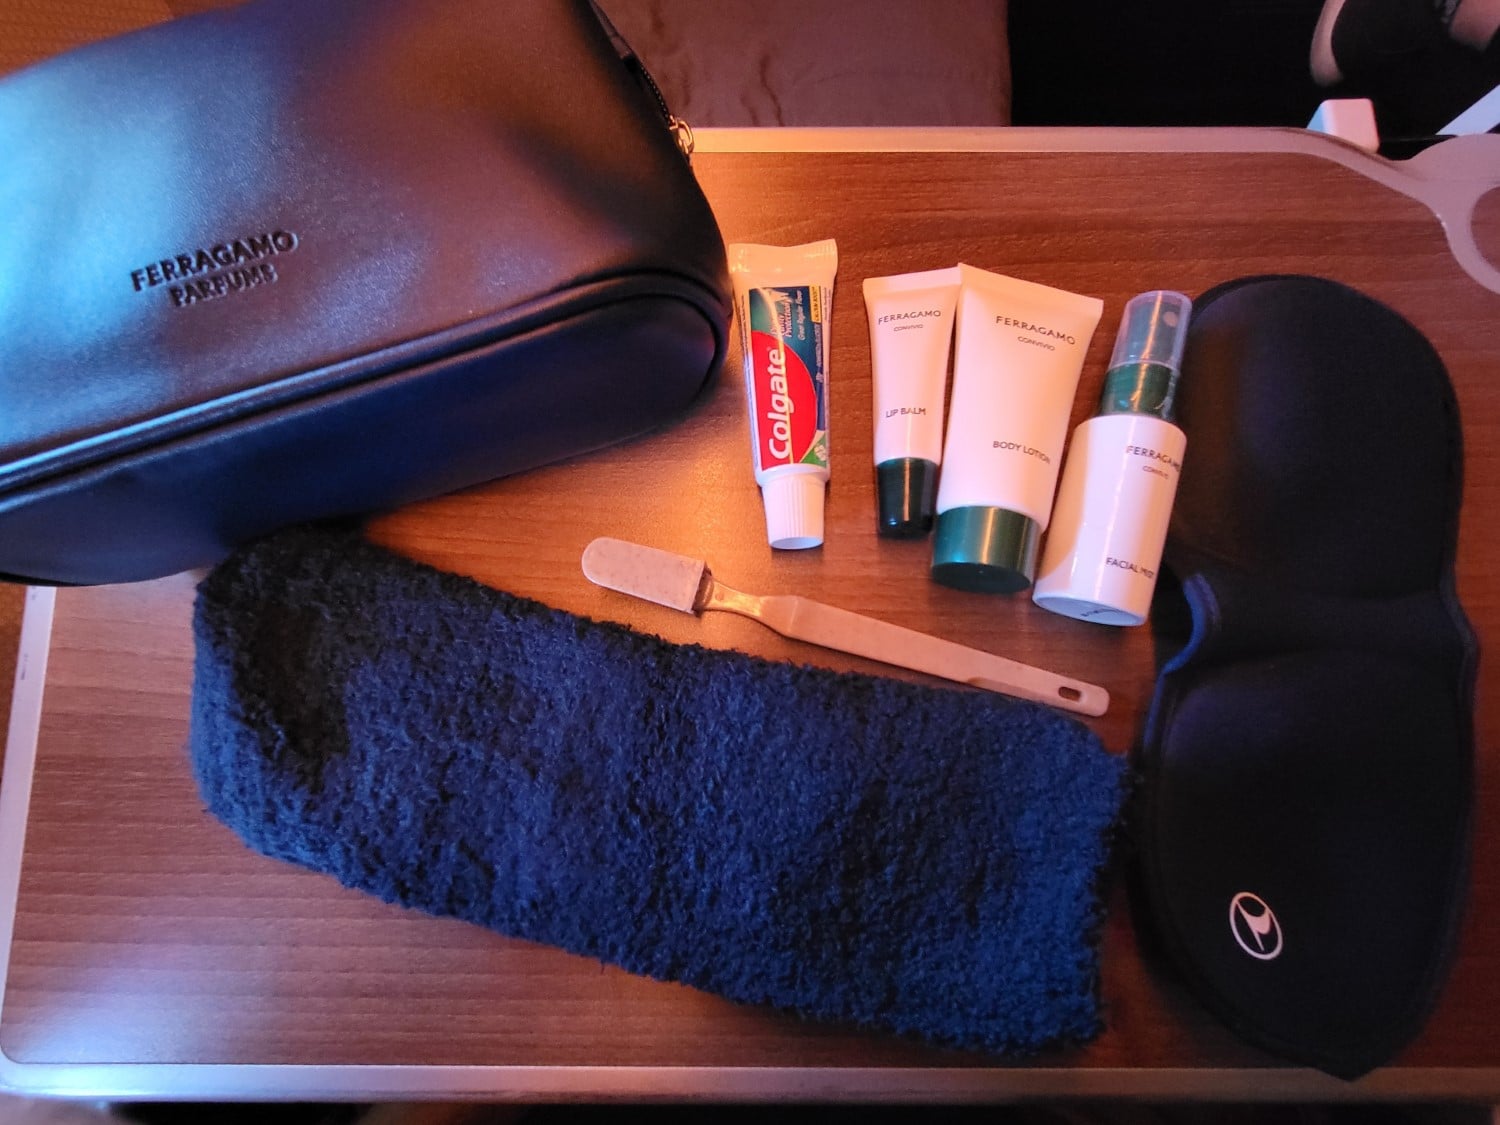 Turkish Airlines 777 business class amenity kit contents.